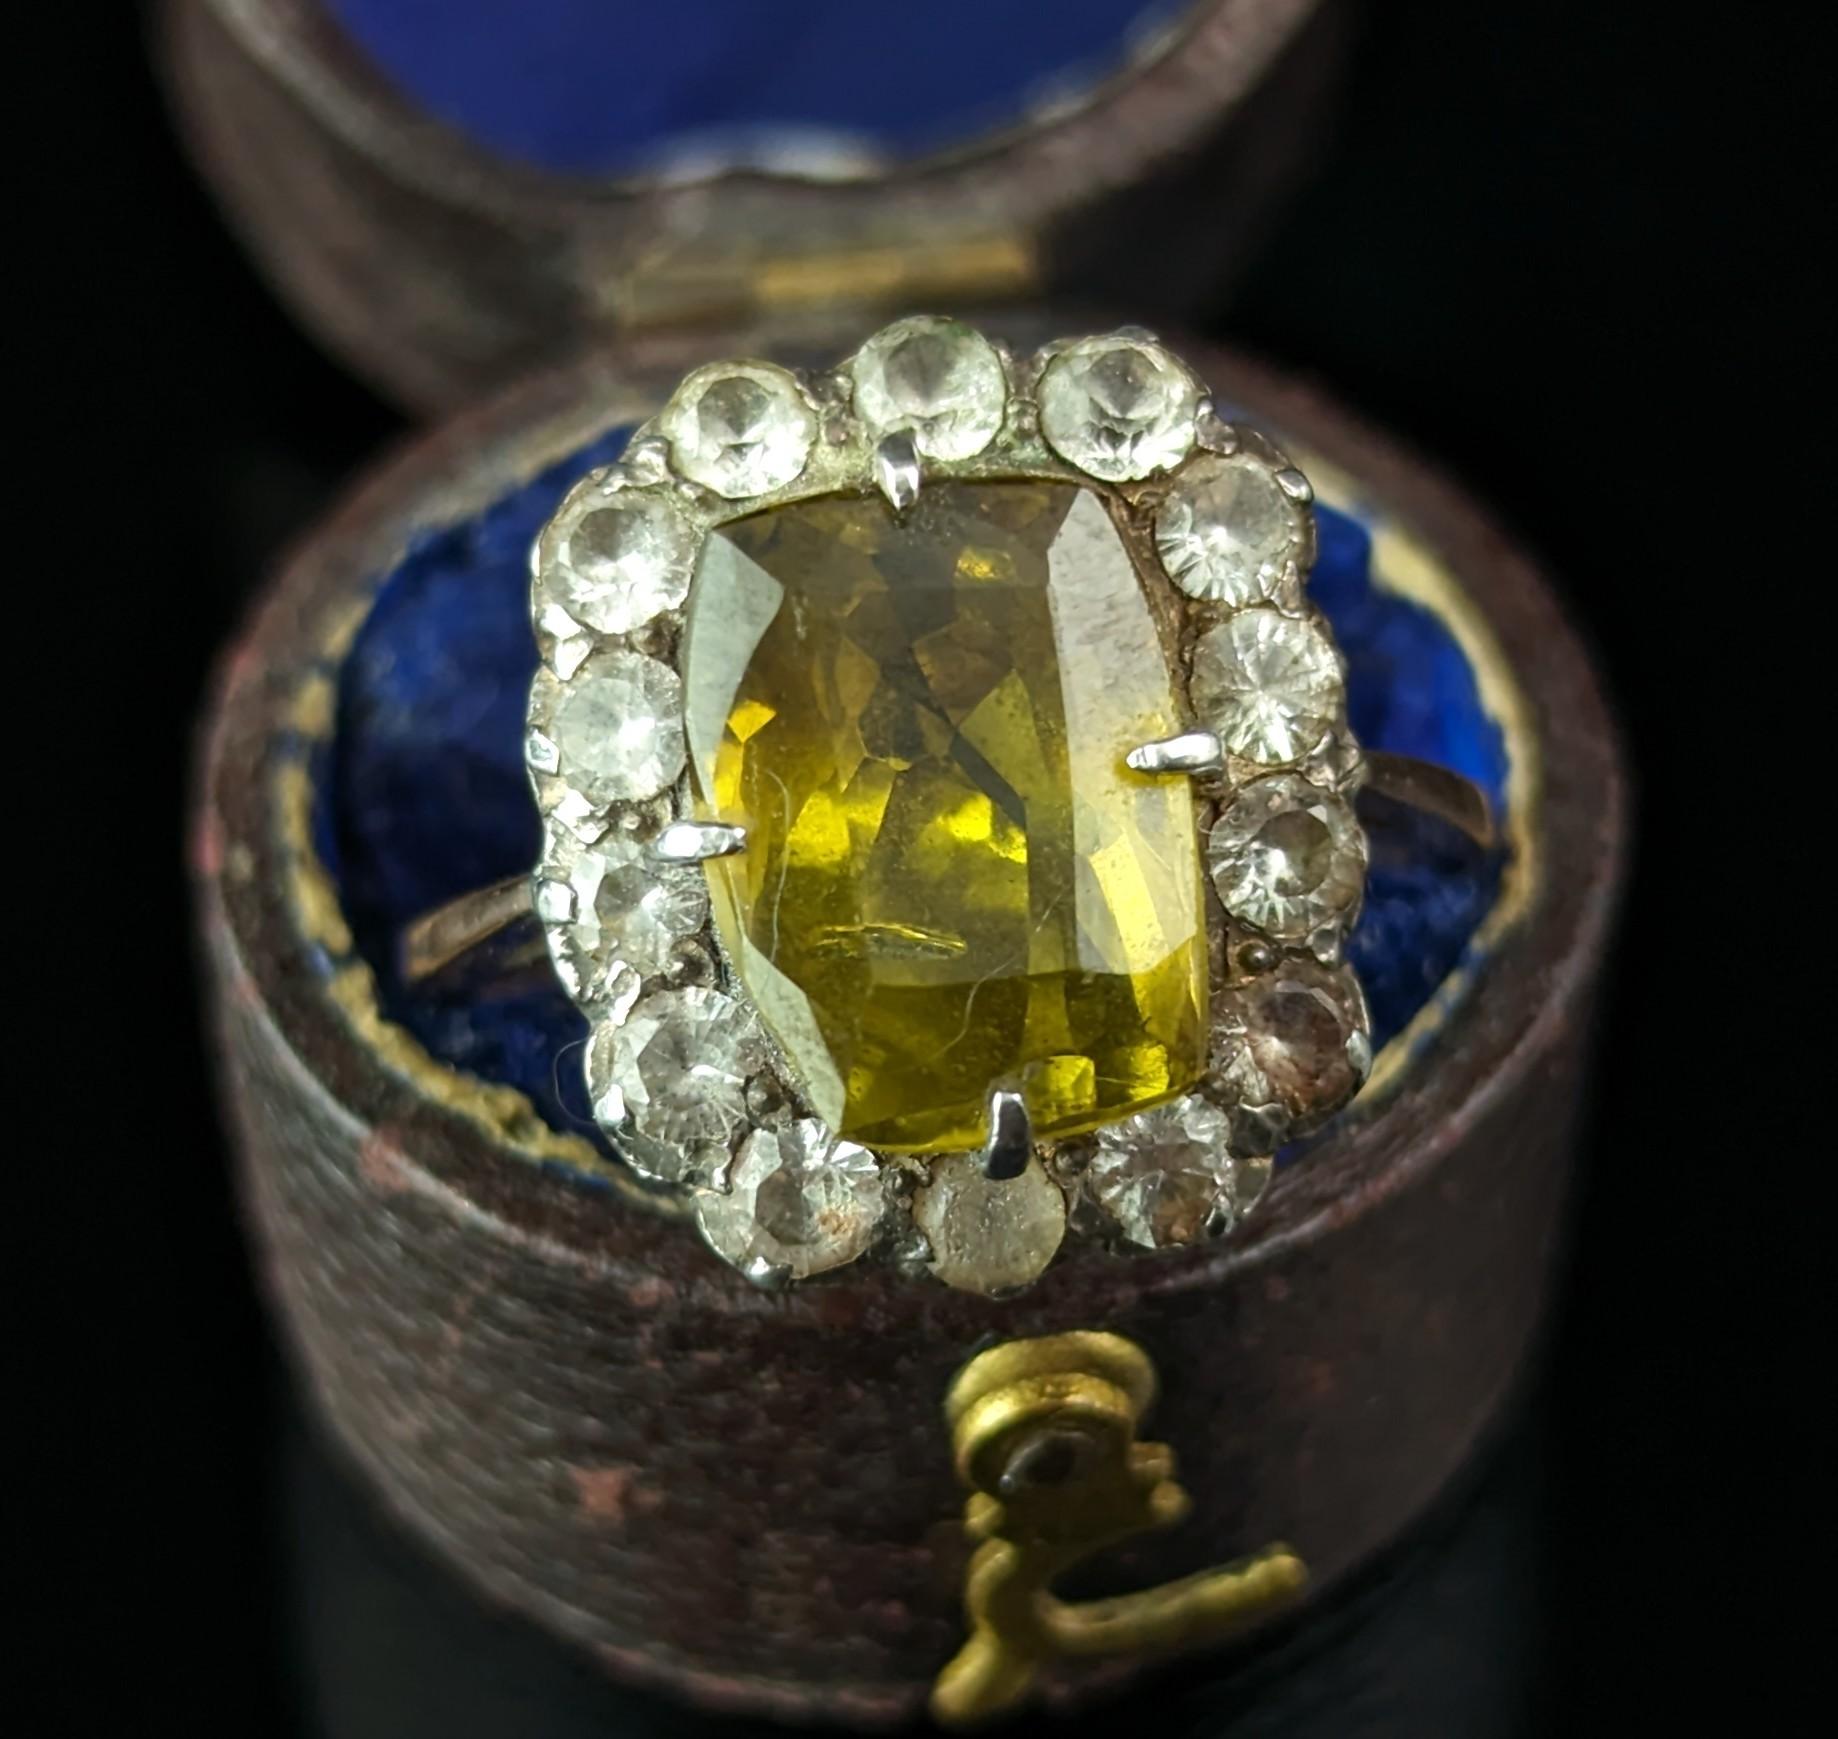 This gorgeous antique Chrysoberyl and Paste cluster ring is just the piece if you are looking for an interesting new addition to your antique ring collection.

She is crafted in rich 9ct yellow gold with a smooth band, the stones set into sterling